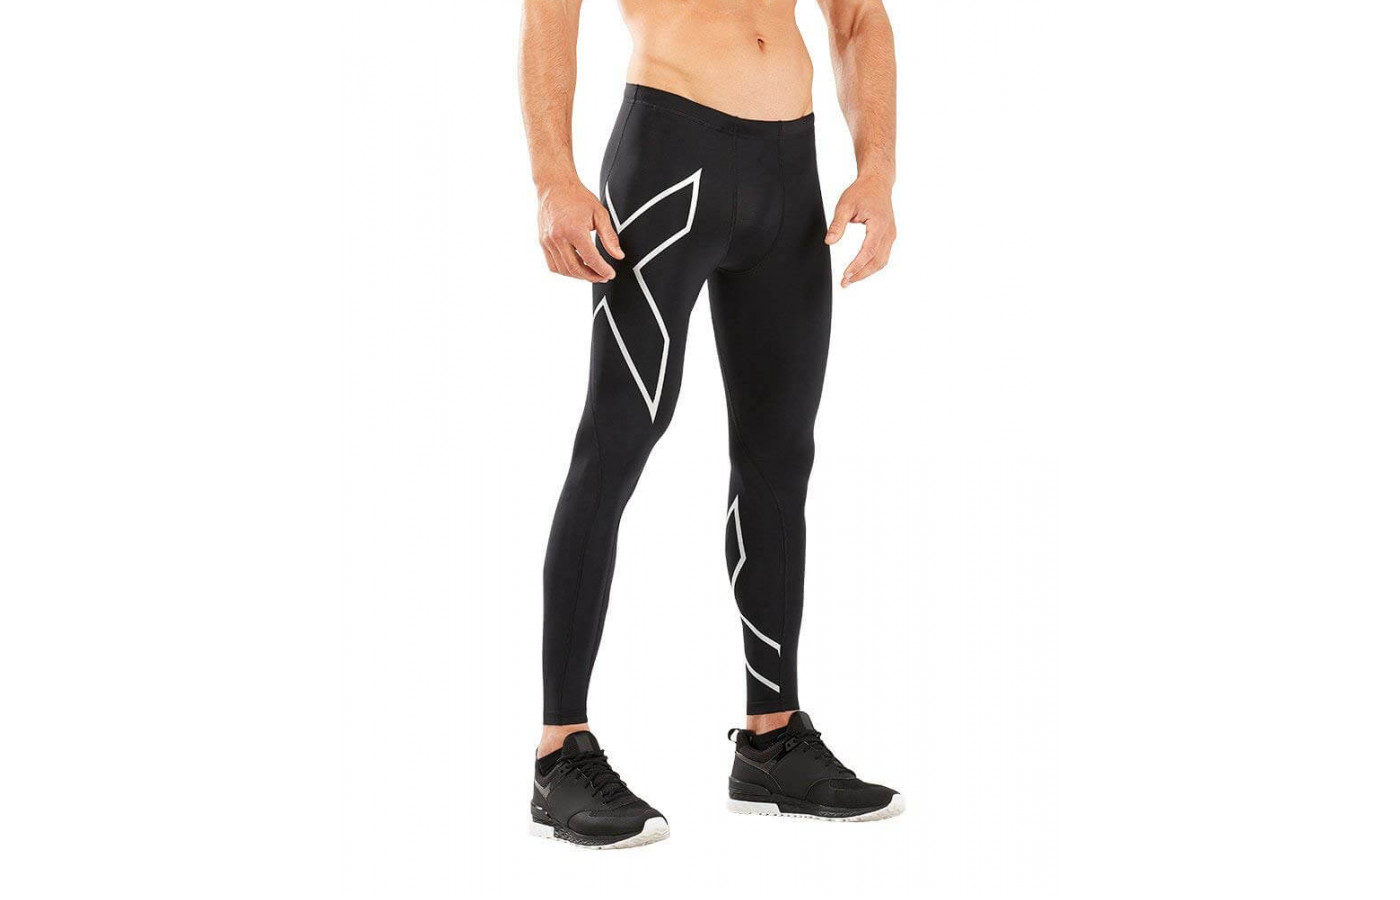 The 2XU Compression Tights are made from a mixture of nylon and elastane.